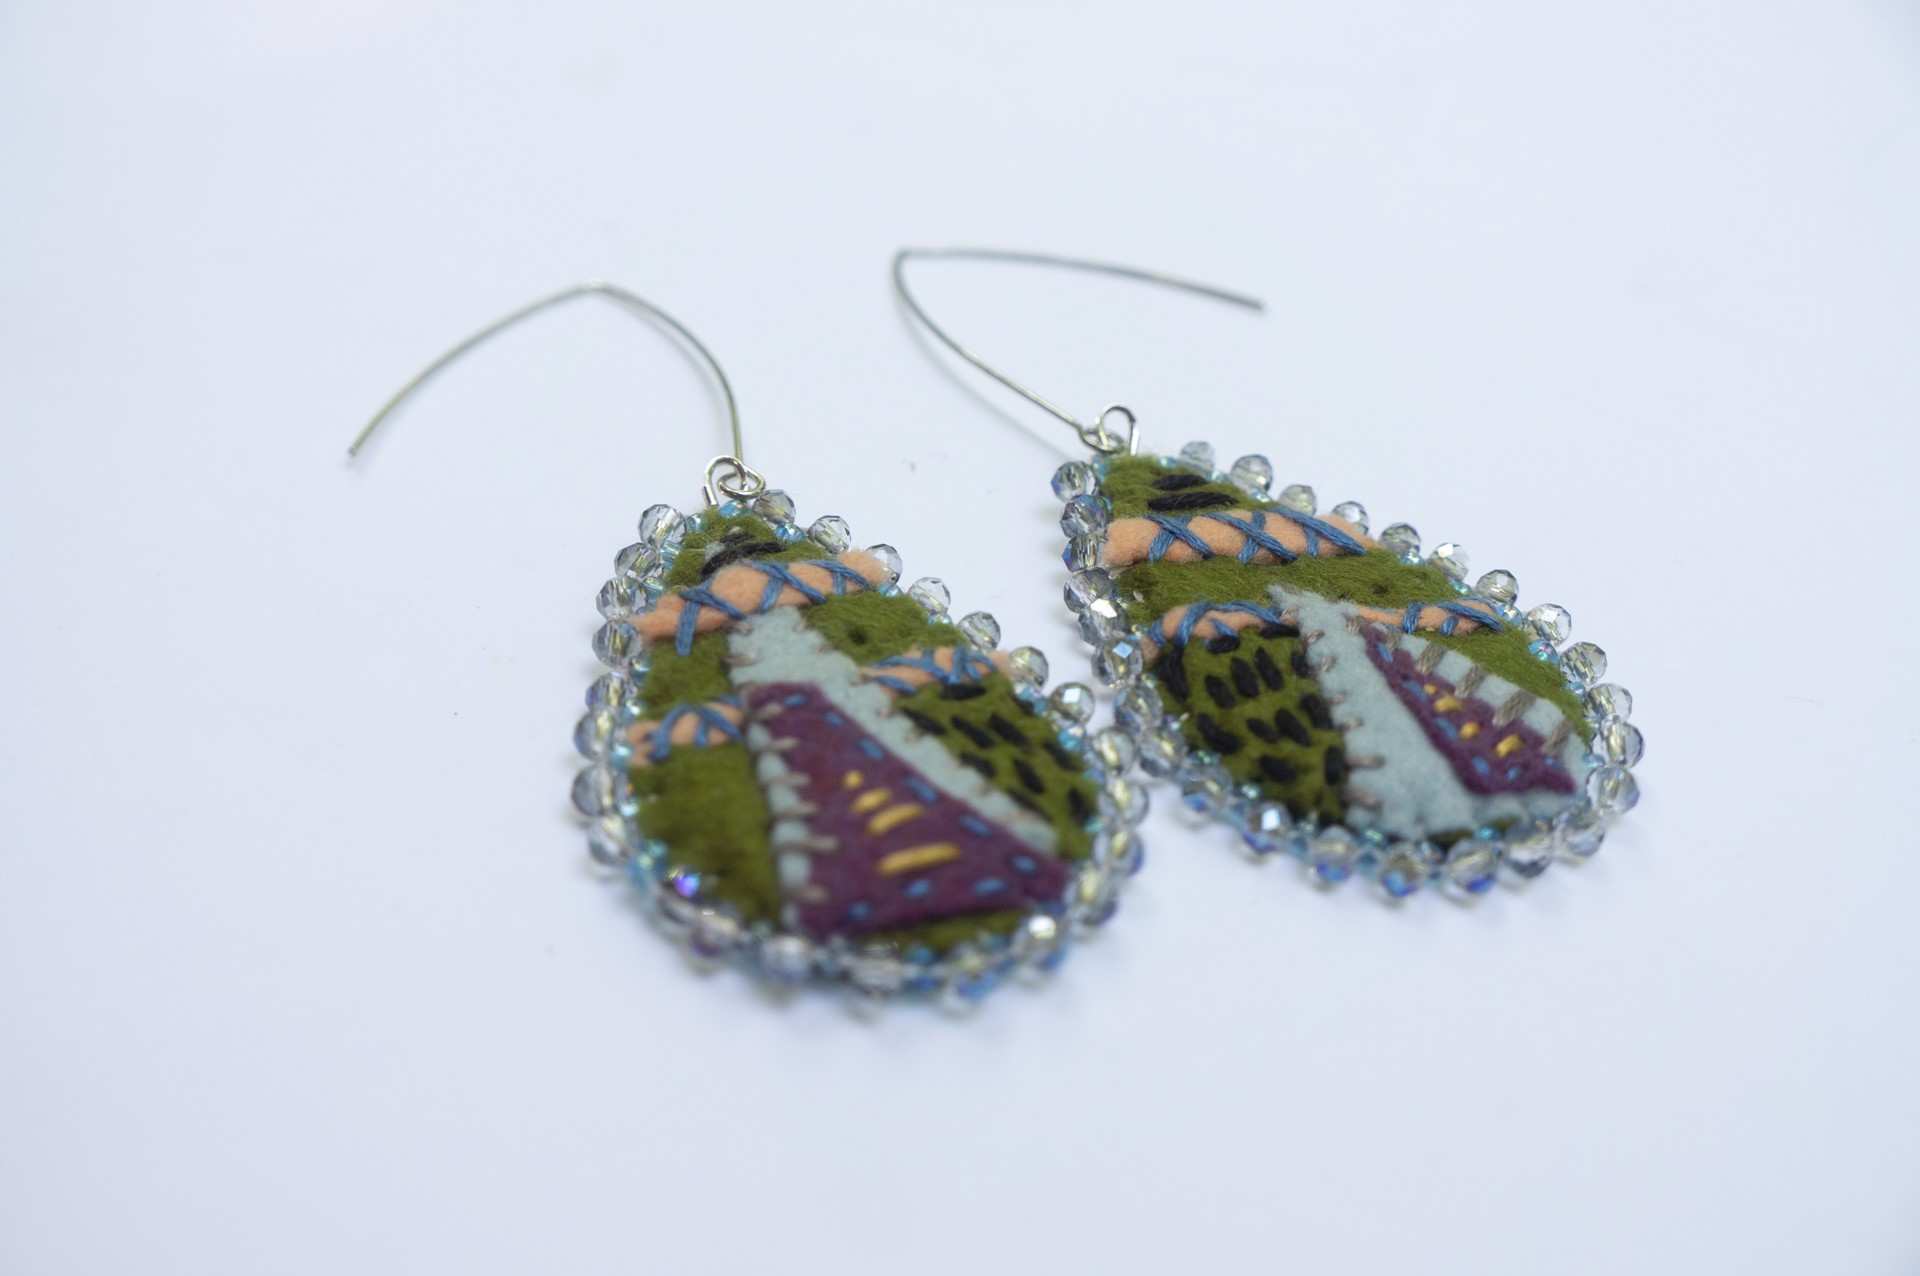 Green, blue edged, embroidered earrings by Hattie Lee Mendoza